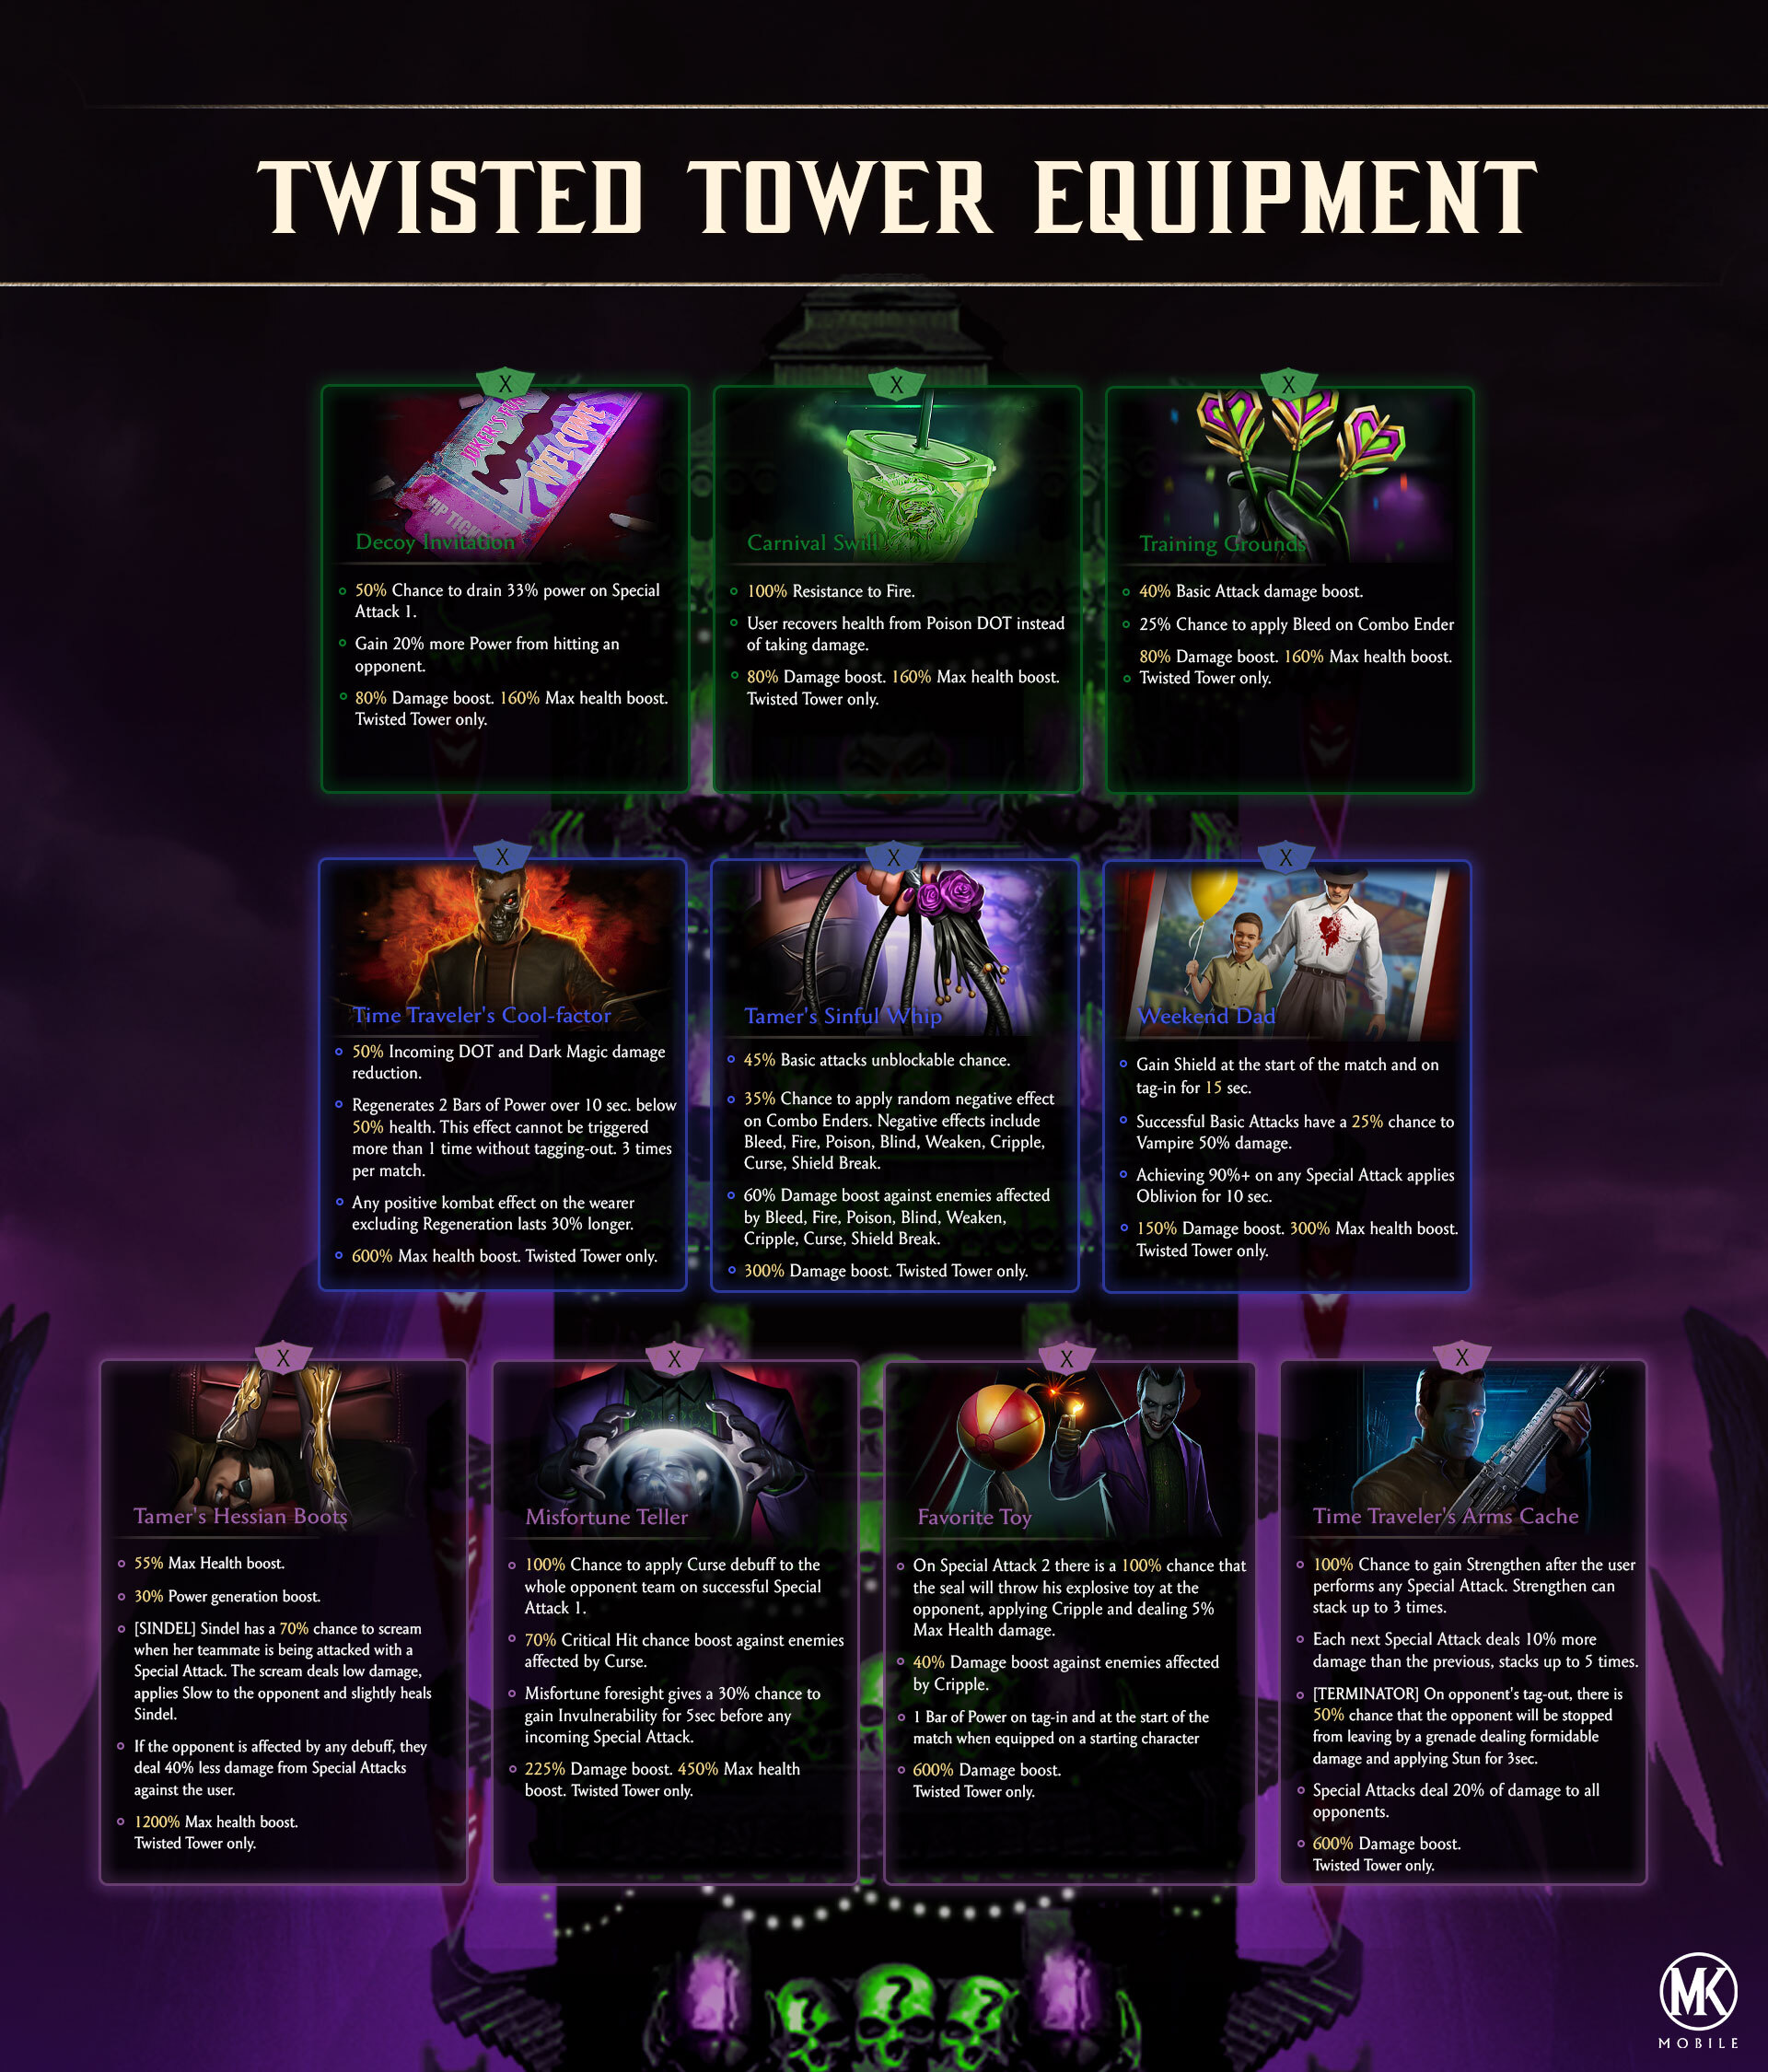 MKM_TWISTED_TOWER_INFOGRAPHIC__3_.jpg